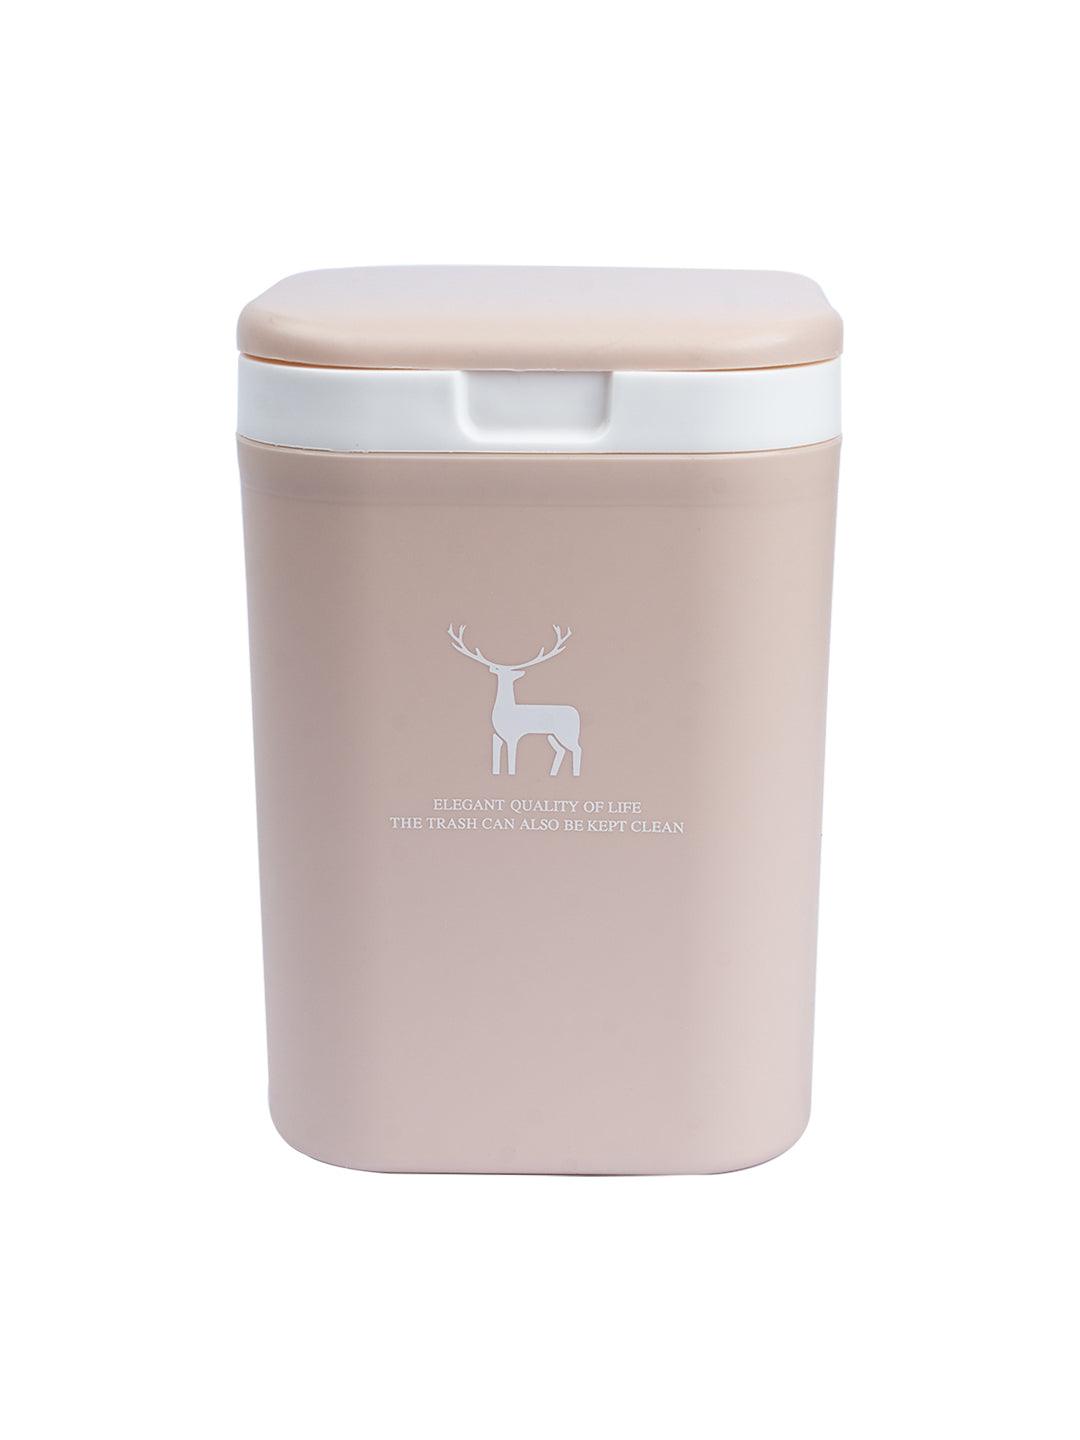 Dust Bin With Lid, Assorted Colour - MARKET 99